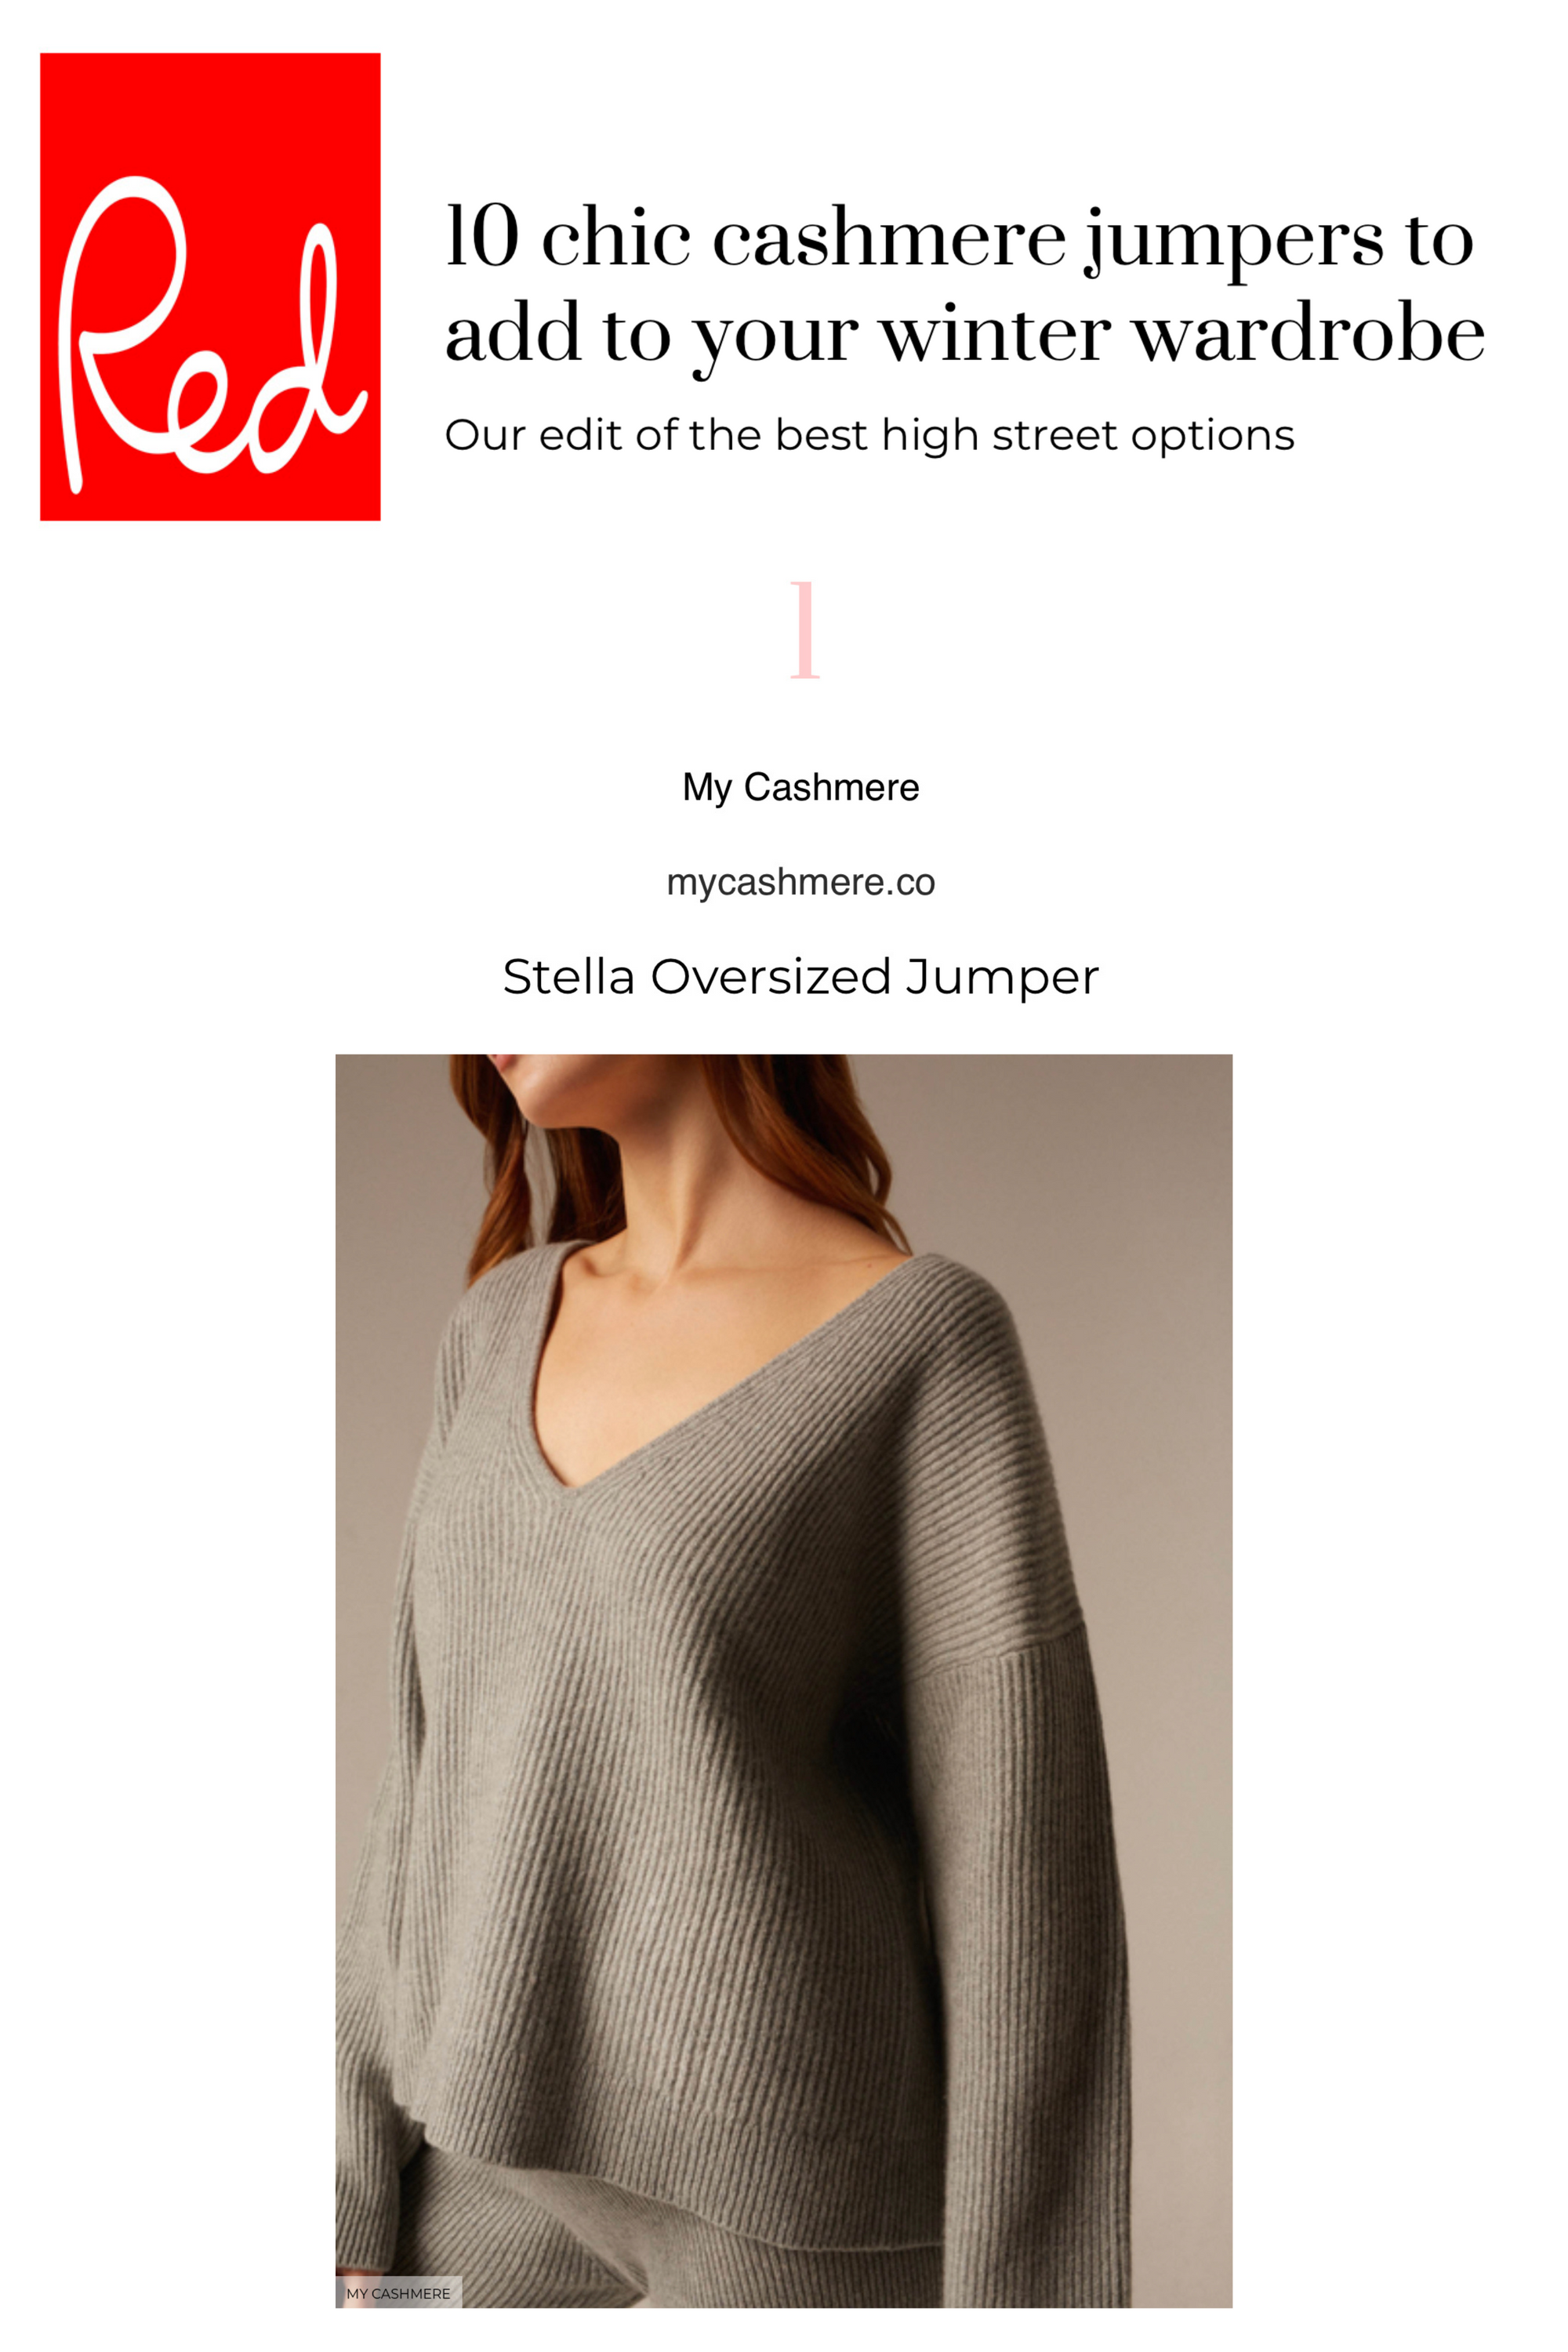 RED | 10 chic cashmere jumpers to add to your winter wardrobe